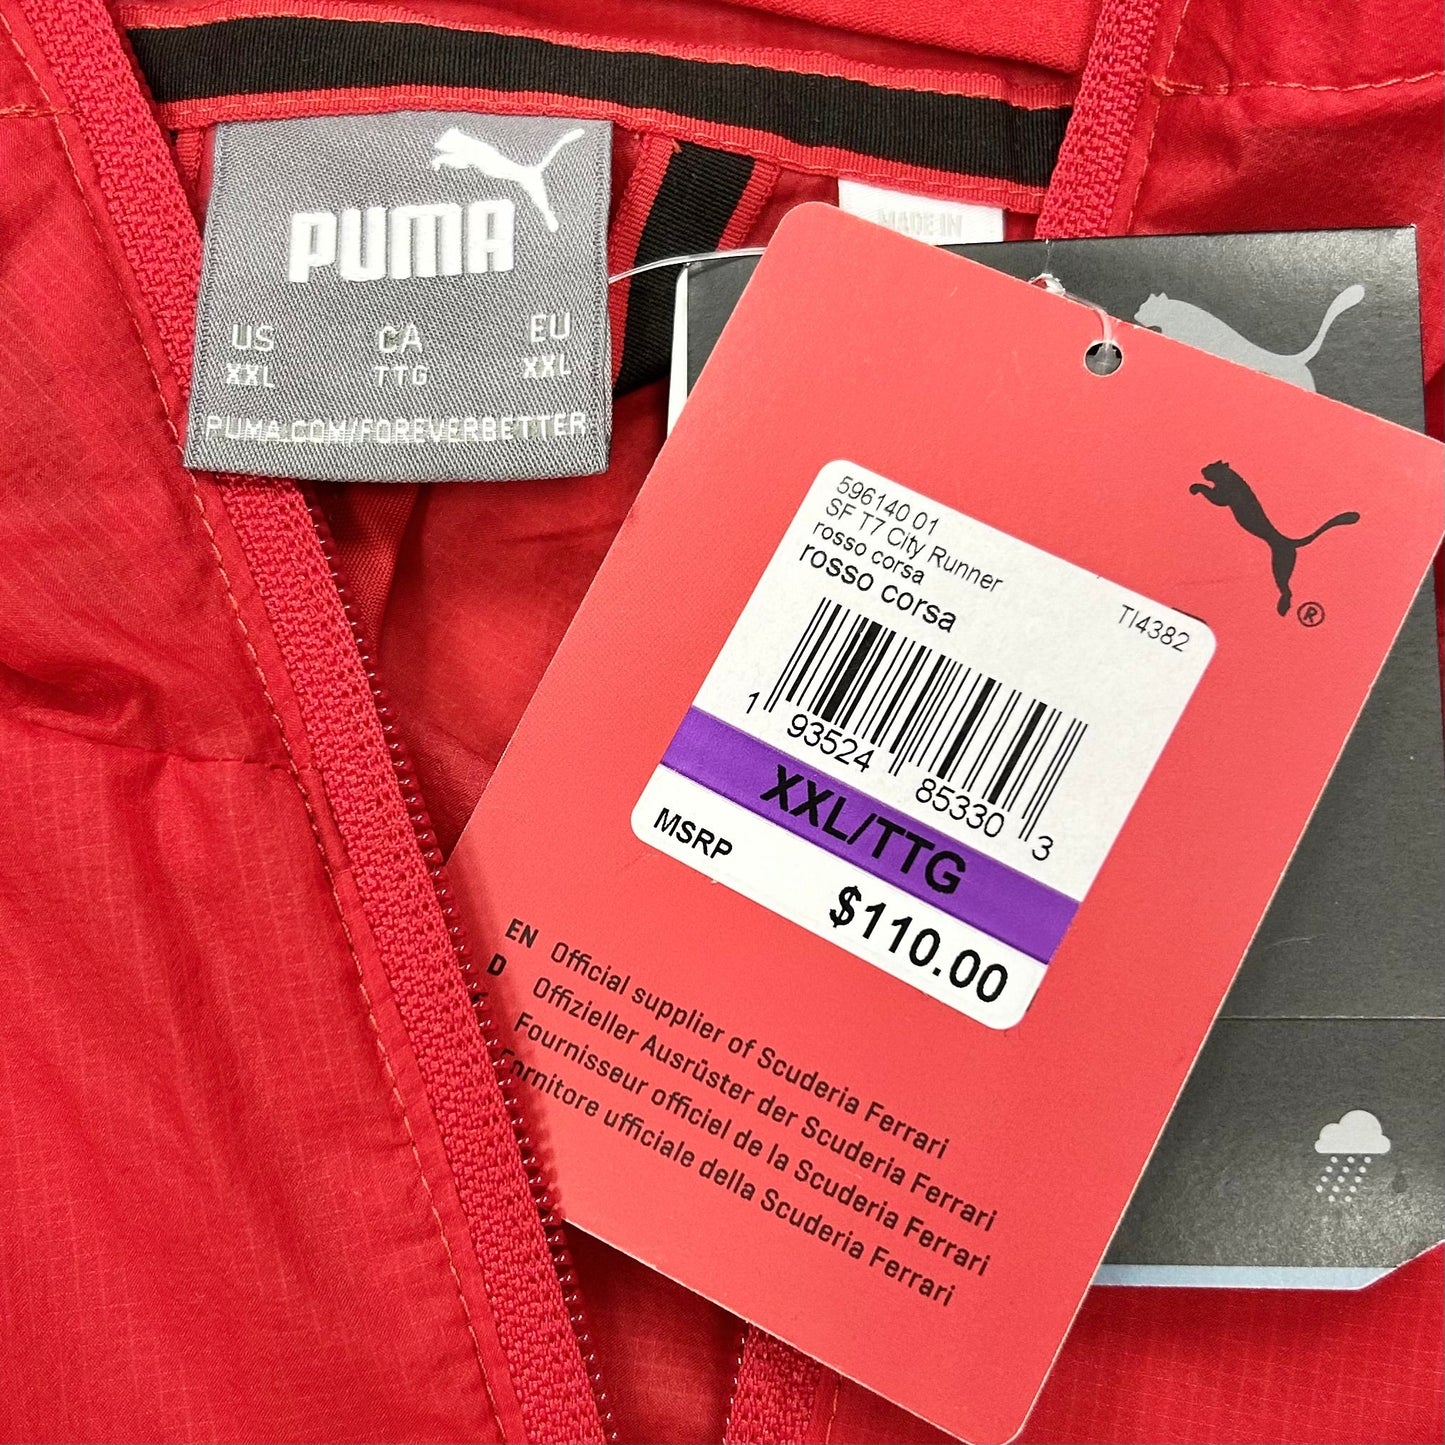 Red Athletic Jacket By Puma, Size: 2x